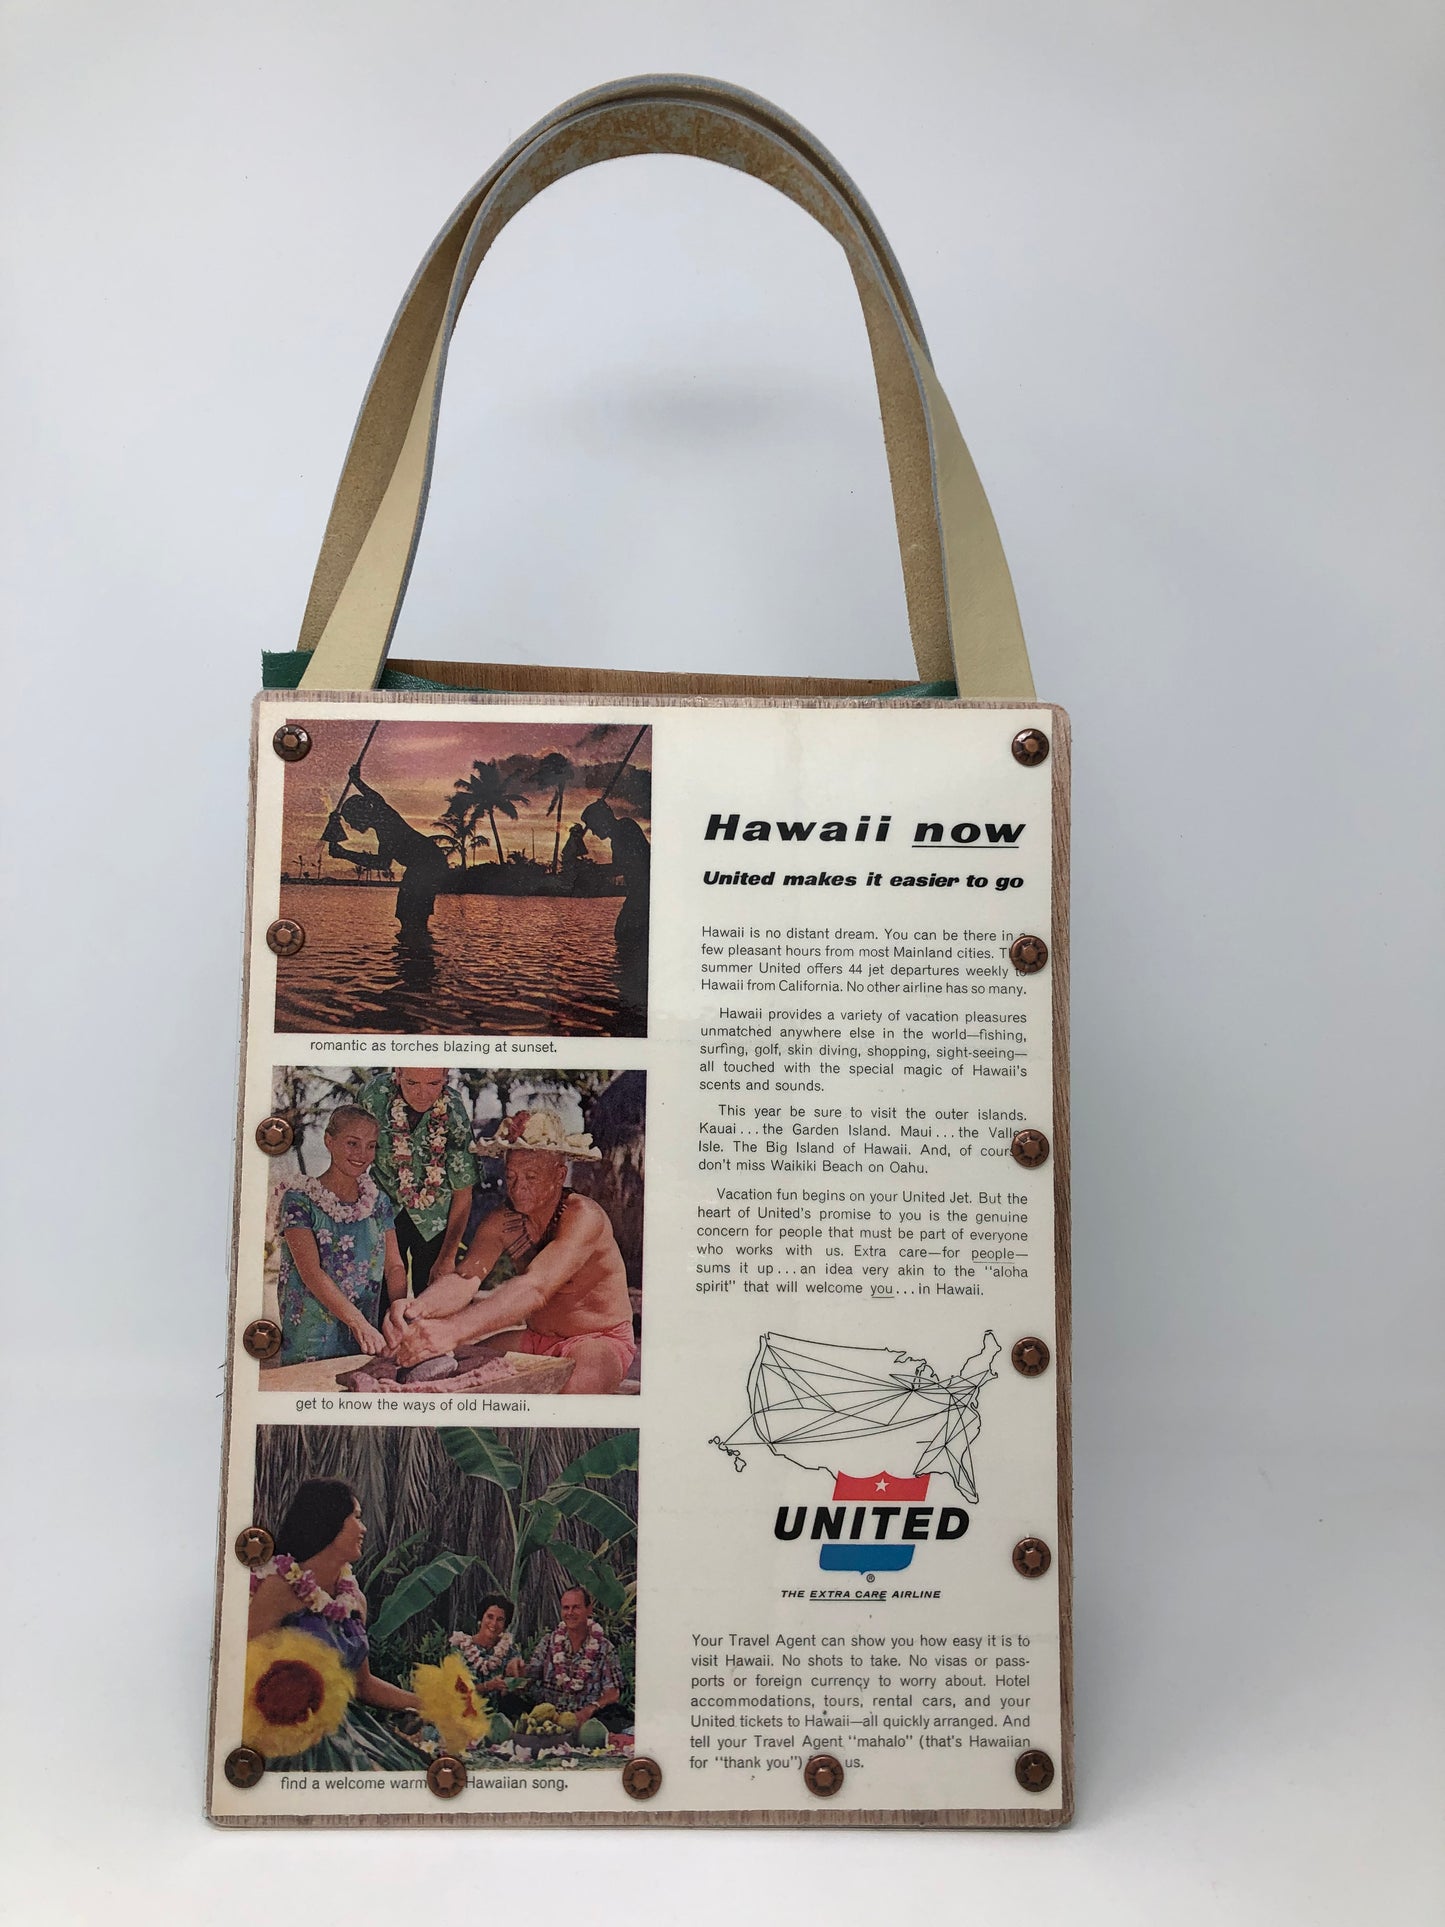 Vintage Graphics Magazine Ad Purse - United Airlines from Sunset June 1963